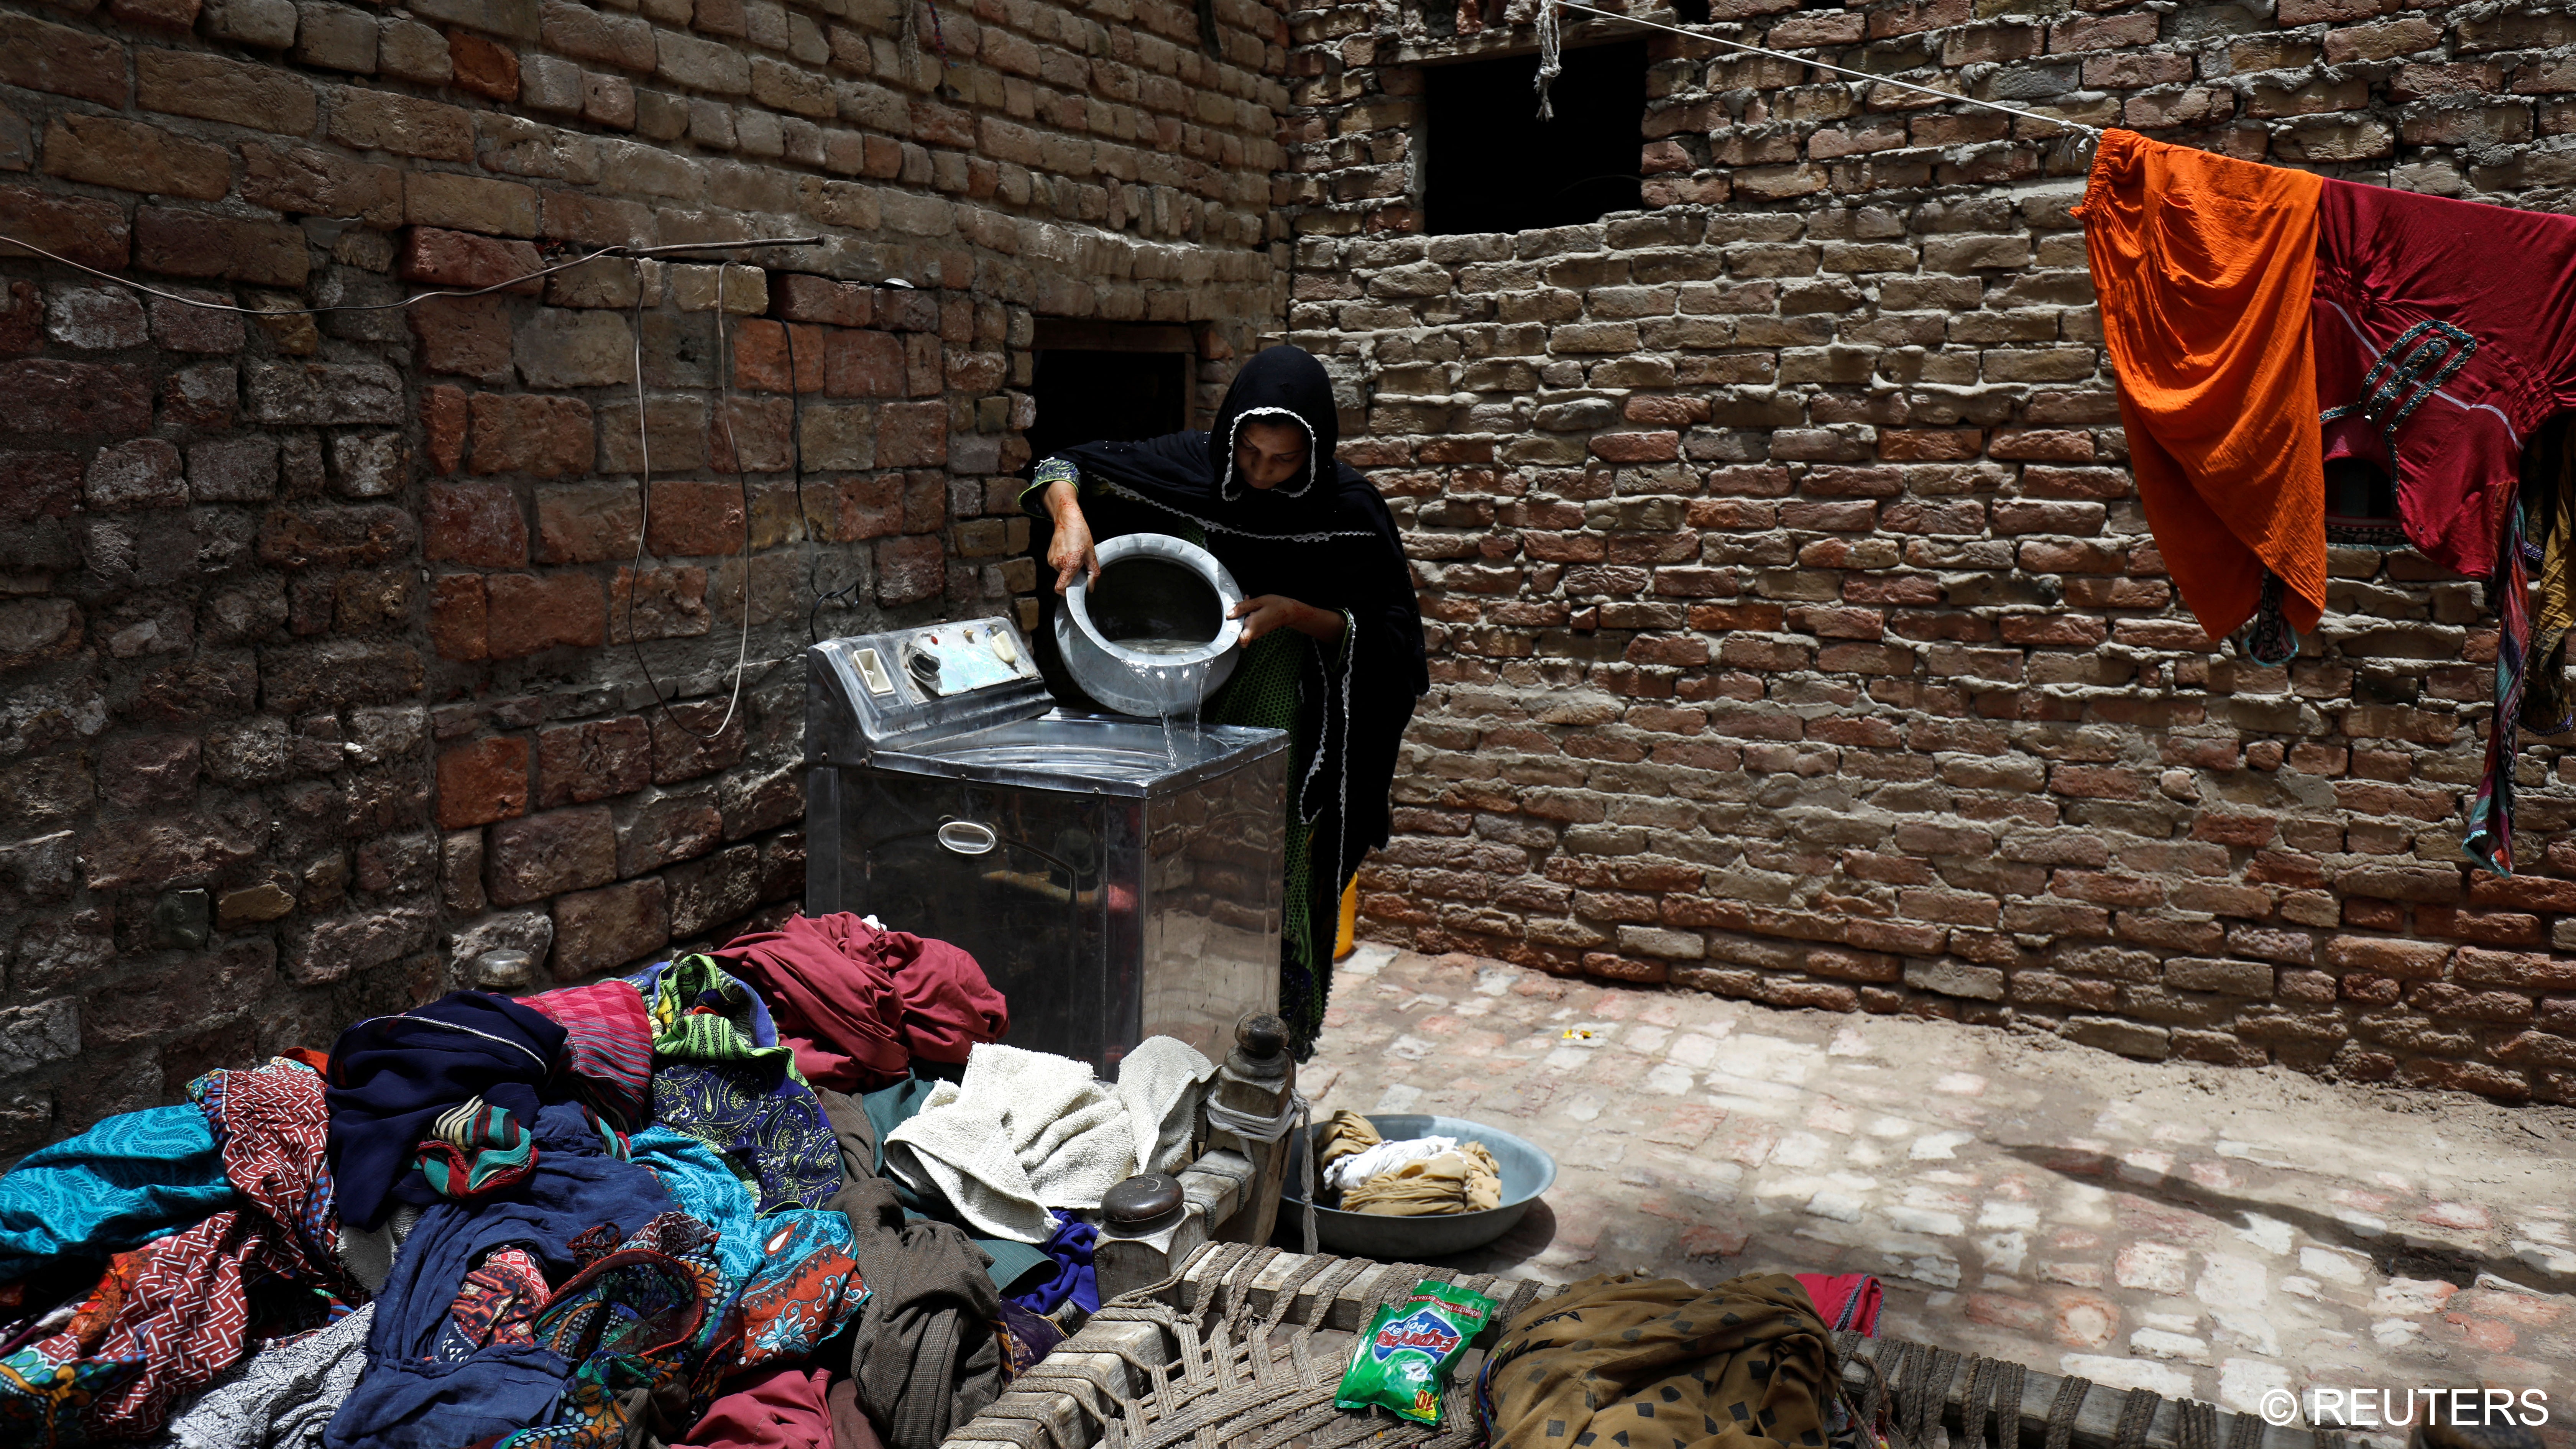 Zahida, 16, washes clothes outside her family home (photo: Reuters/Akhtar Soomro)